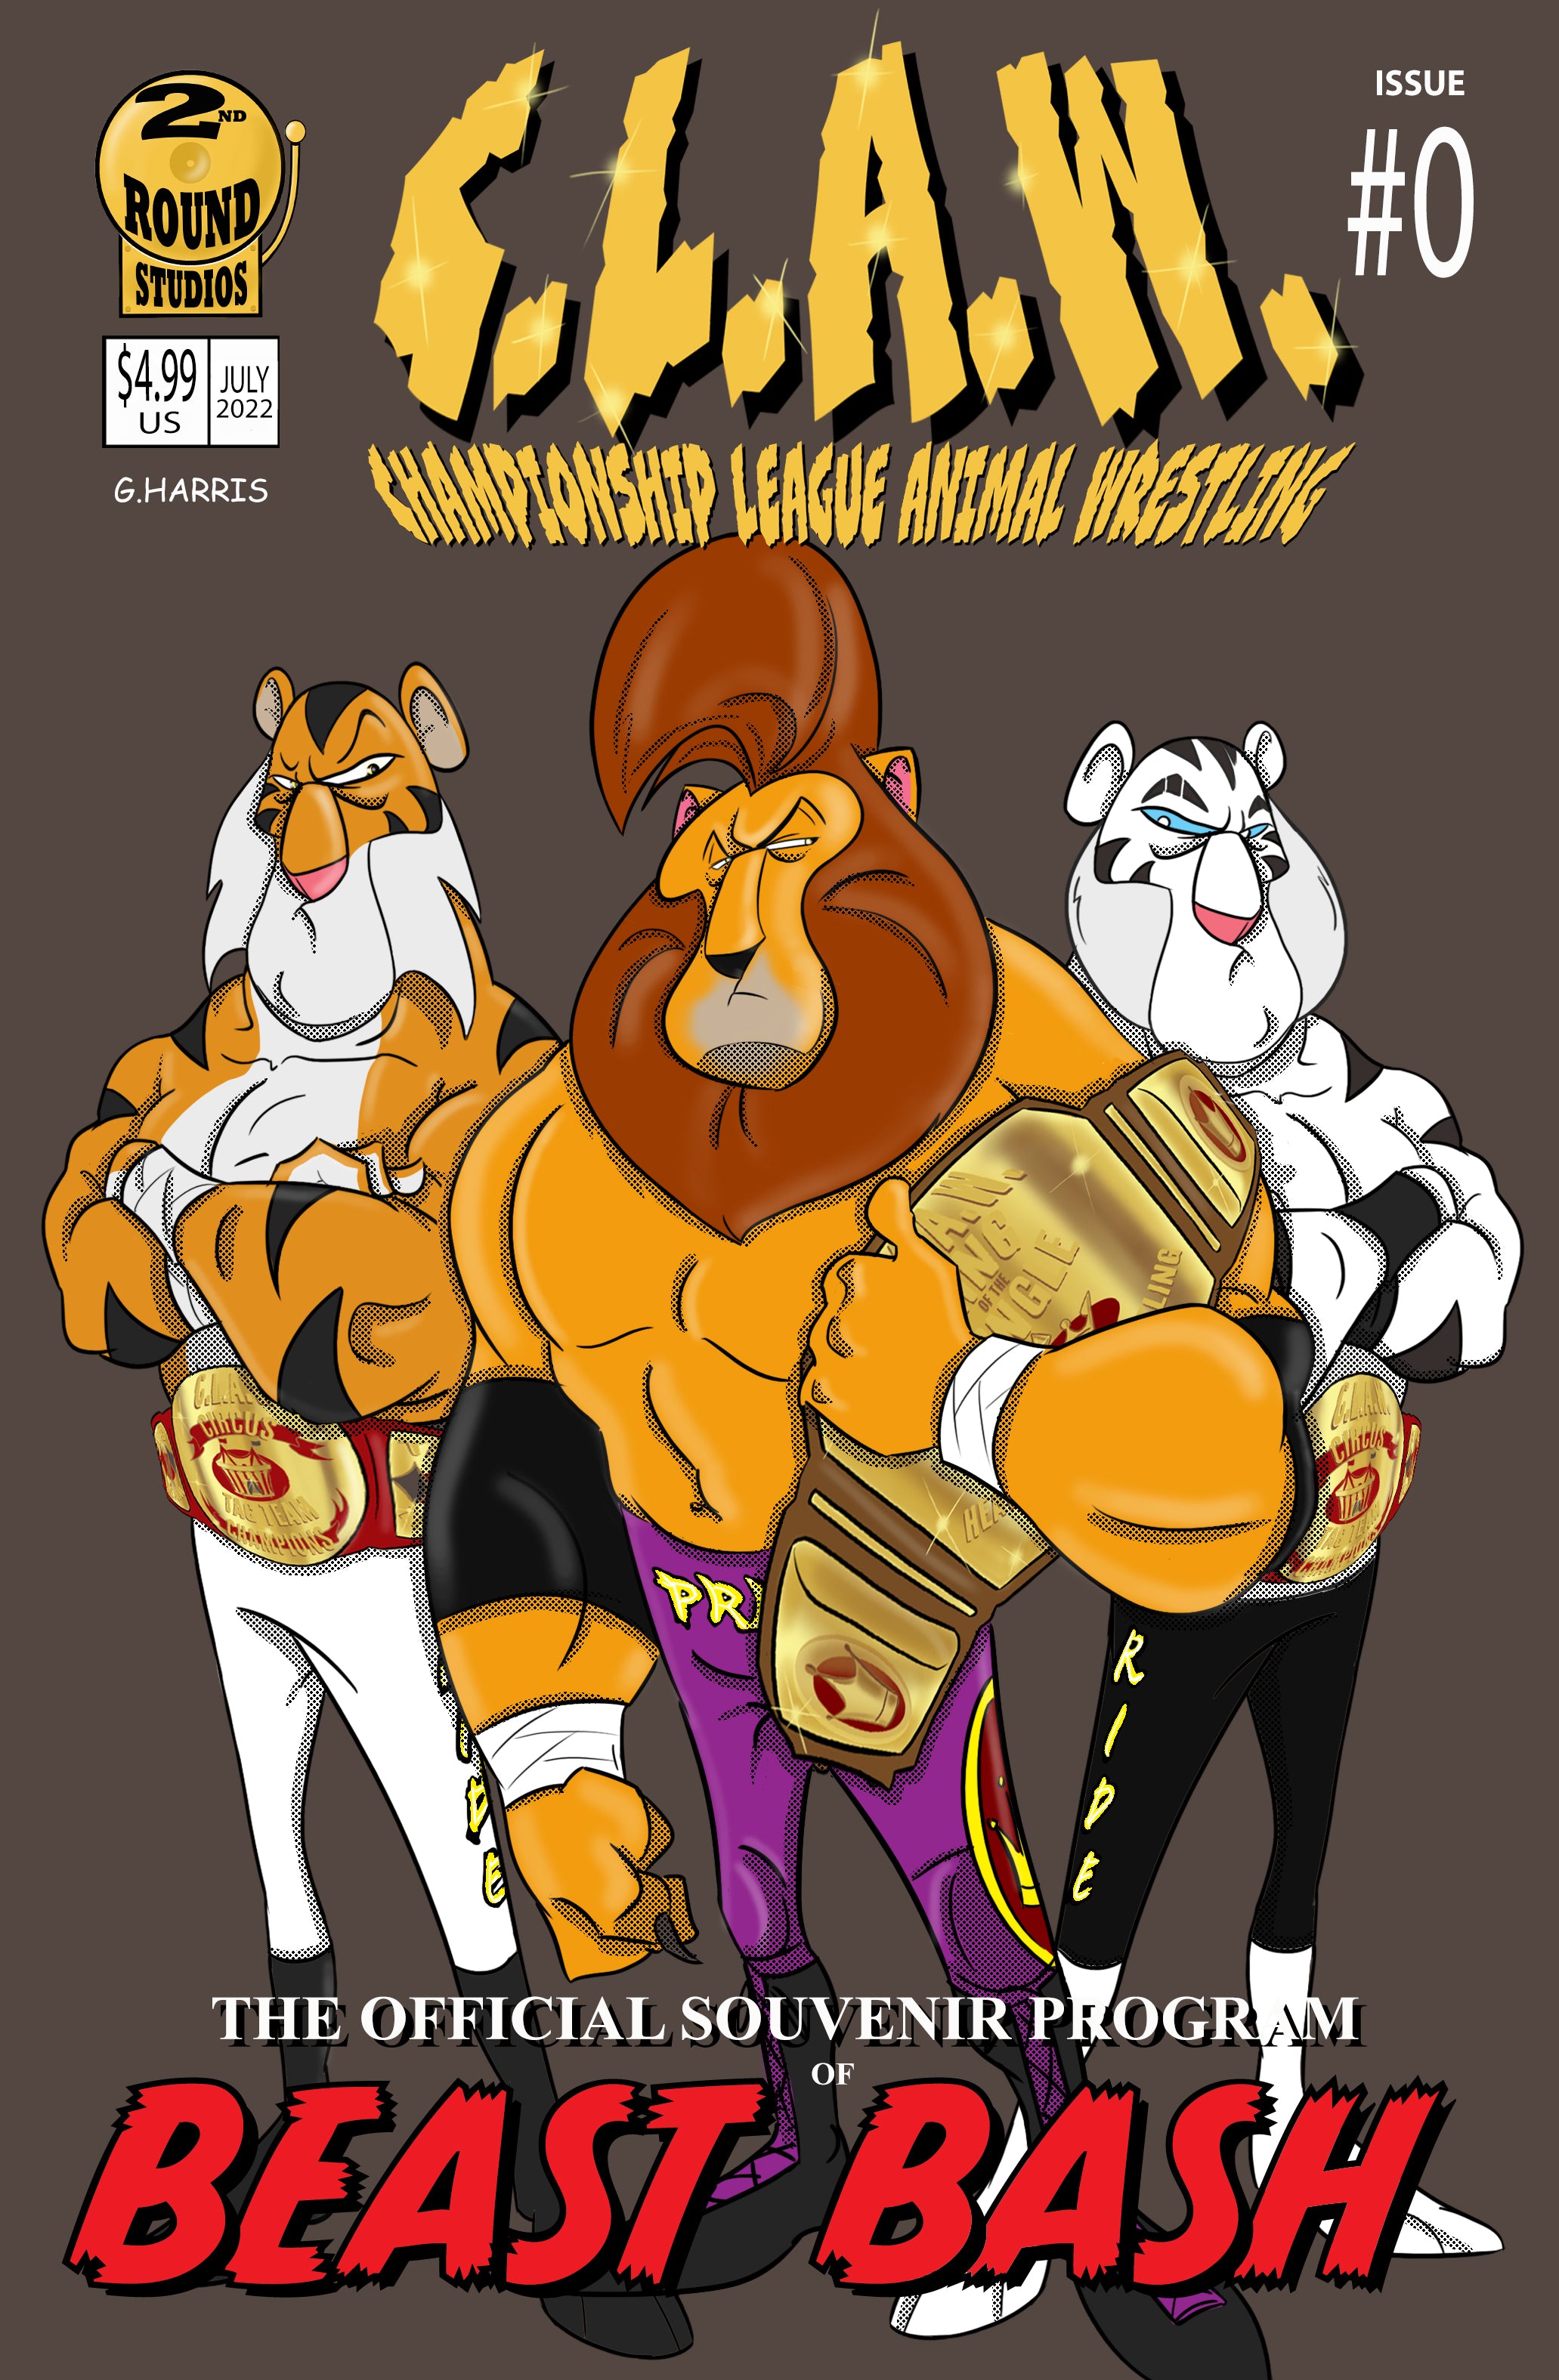 Comic book cover for C.L.A.W.: Cham pionship League Animal Wrestling featuring images of a lion and two tigers